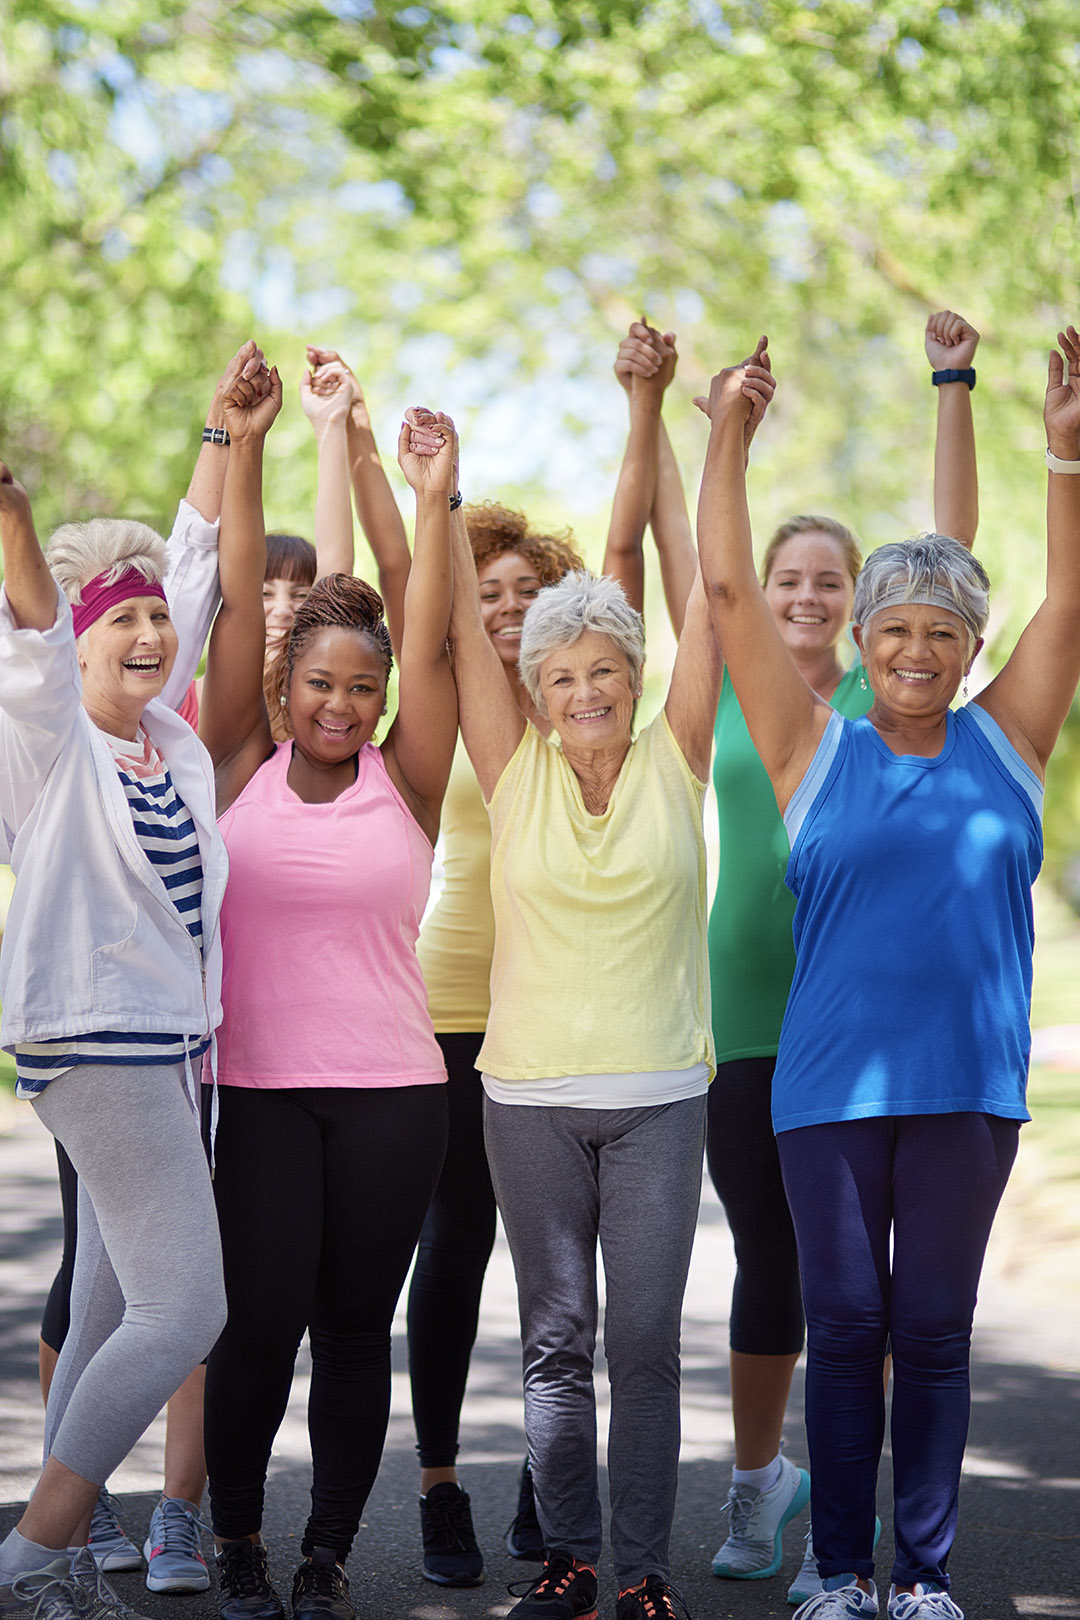 May is National Osteoporosis Awareness and Prevention Month.